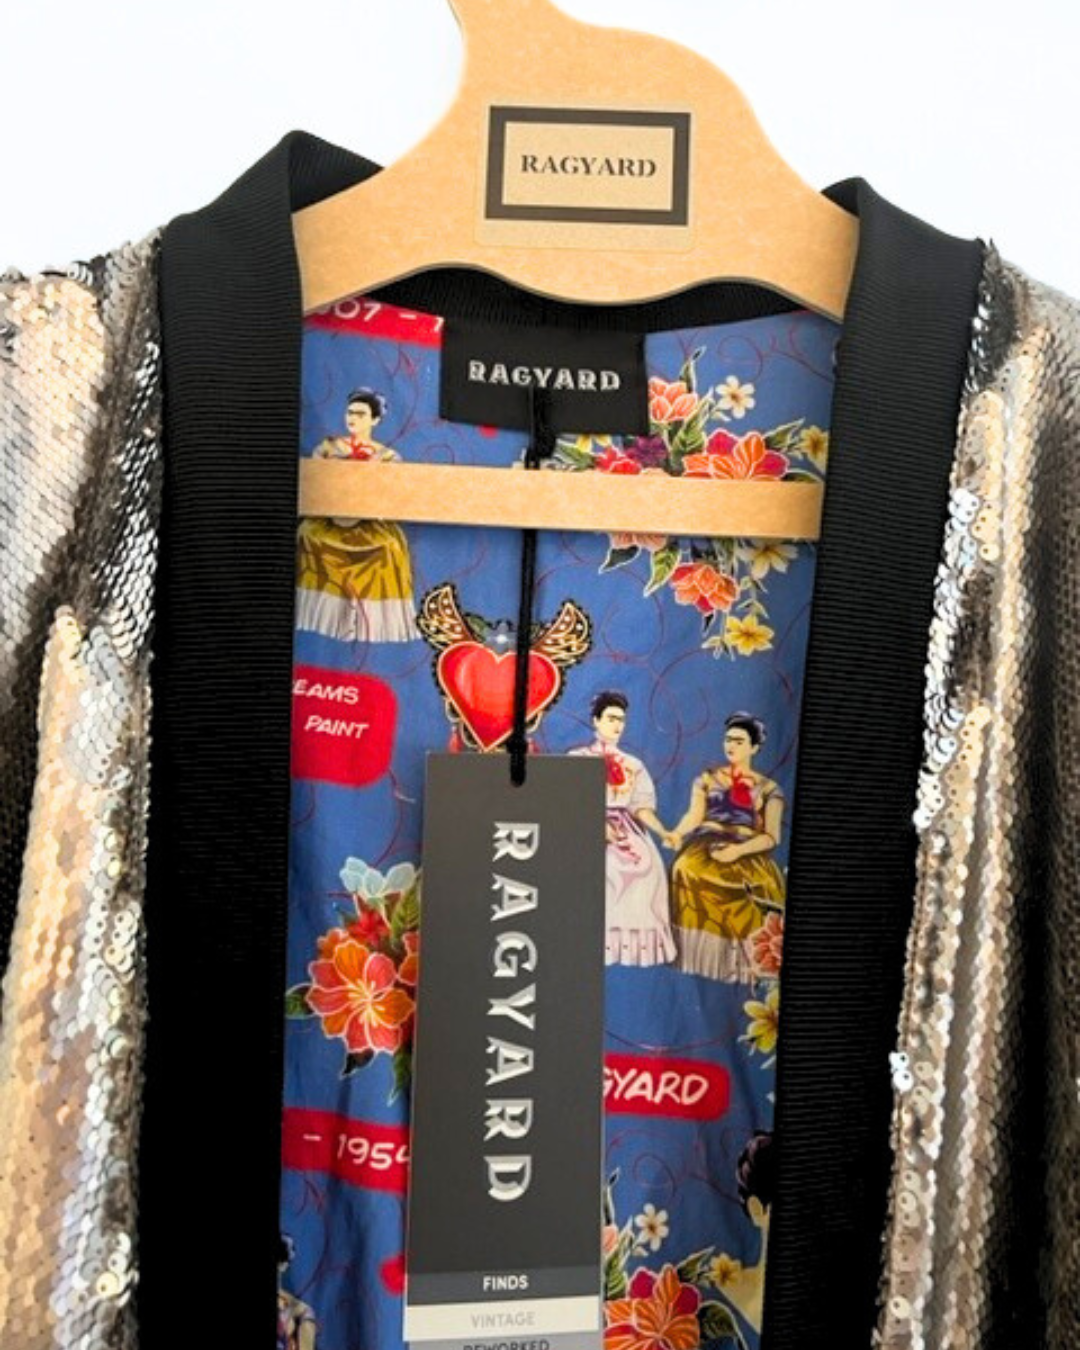 Heavy Silver Flip Sequin Kimono with Psychedelic Peacock sleeves and Frida Kahlo bespoke printed lining